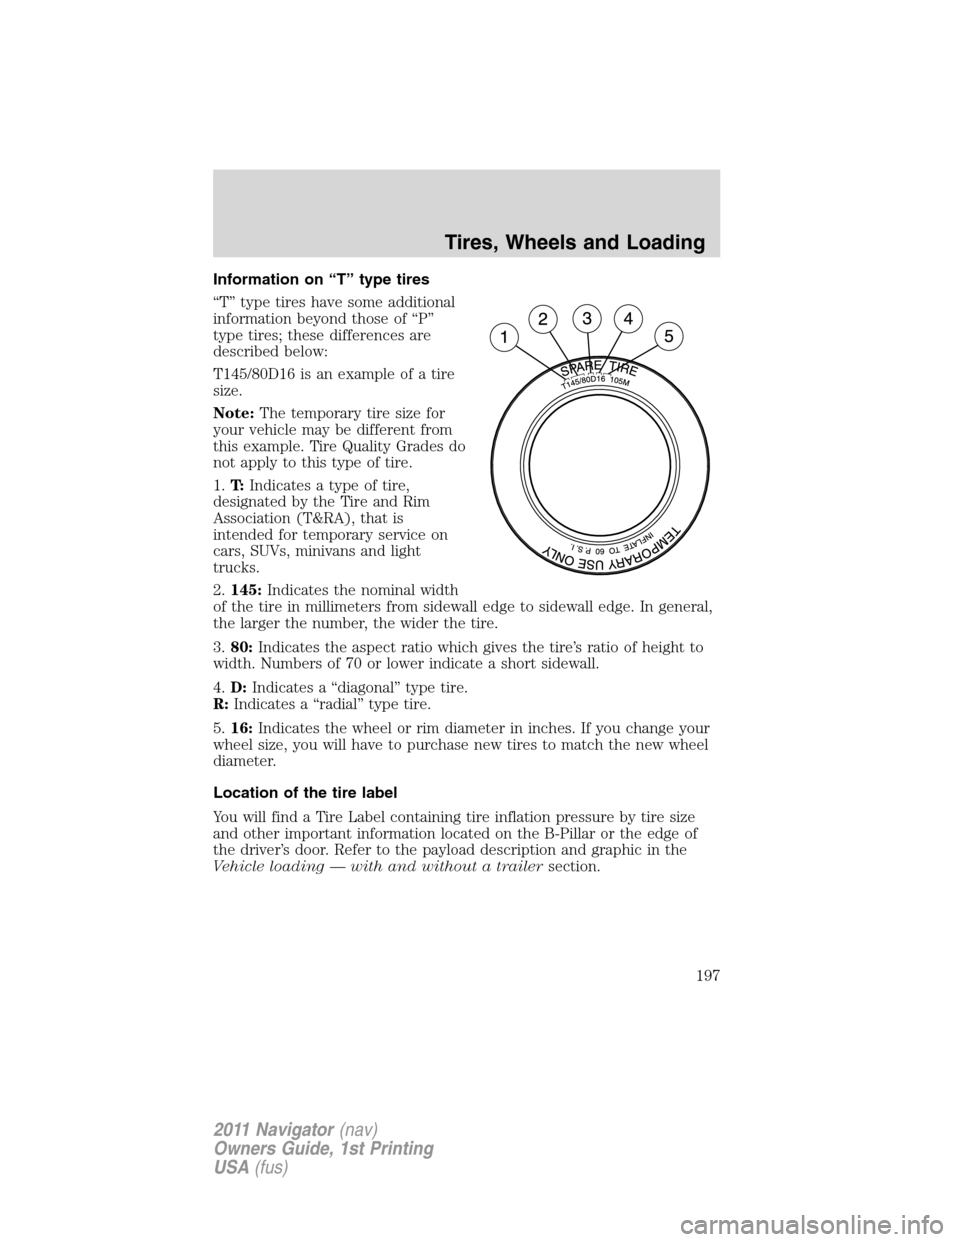 LINCOLN NAVIGATOR 2011  Owners Manual Information on “T” type tires
“T” type tires have some additional
information beyond those of “P”
type tires; these differences are
described below:
T145/80D16 is an example of a tire
size